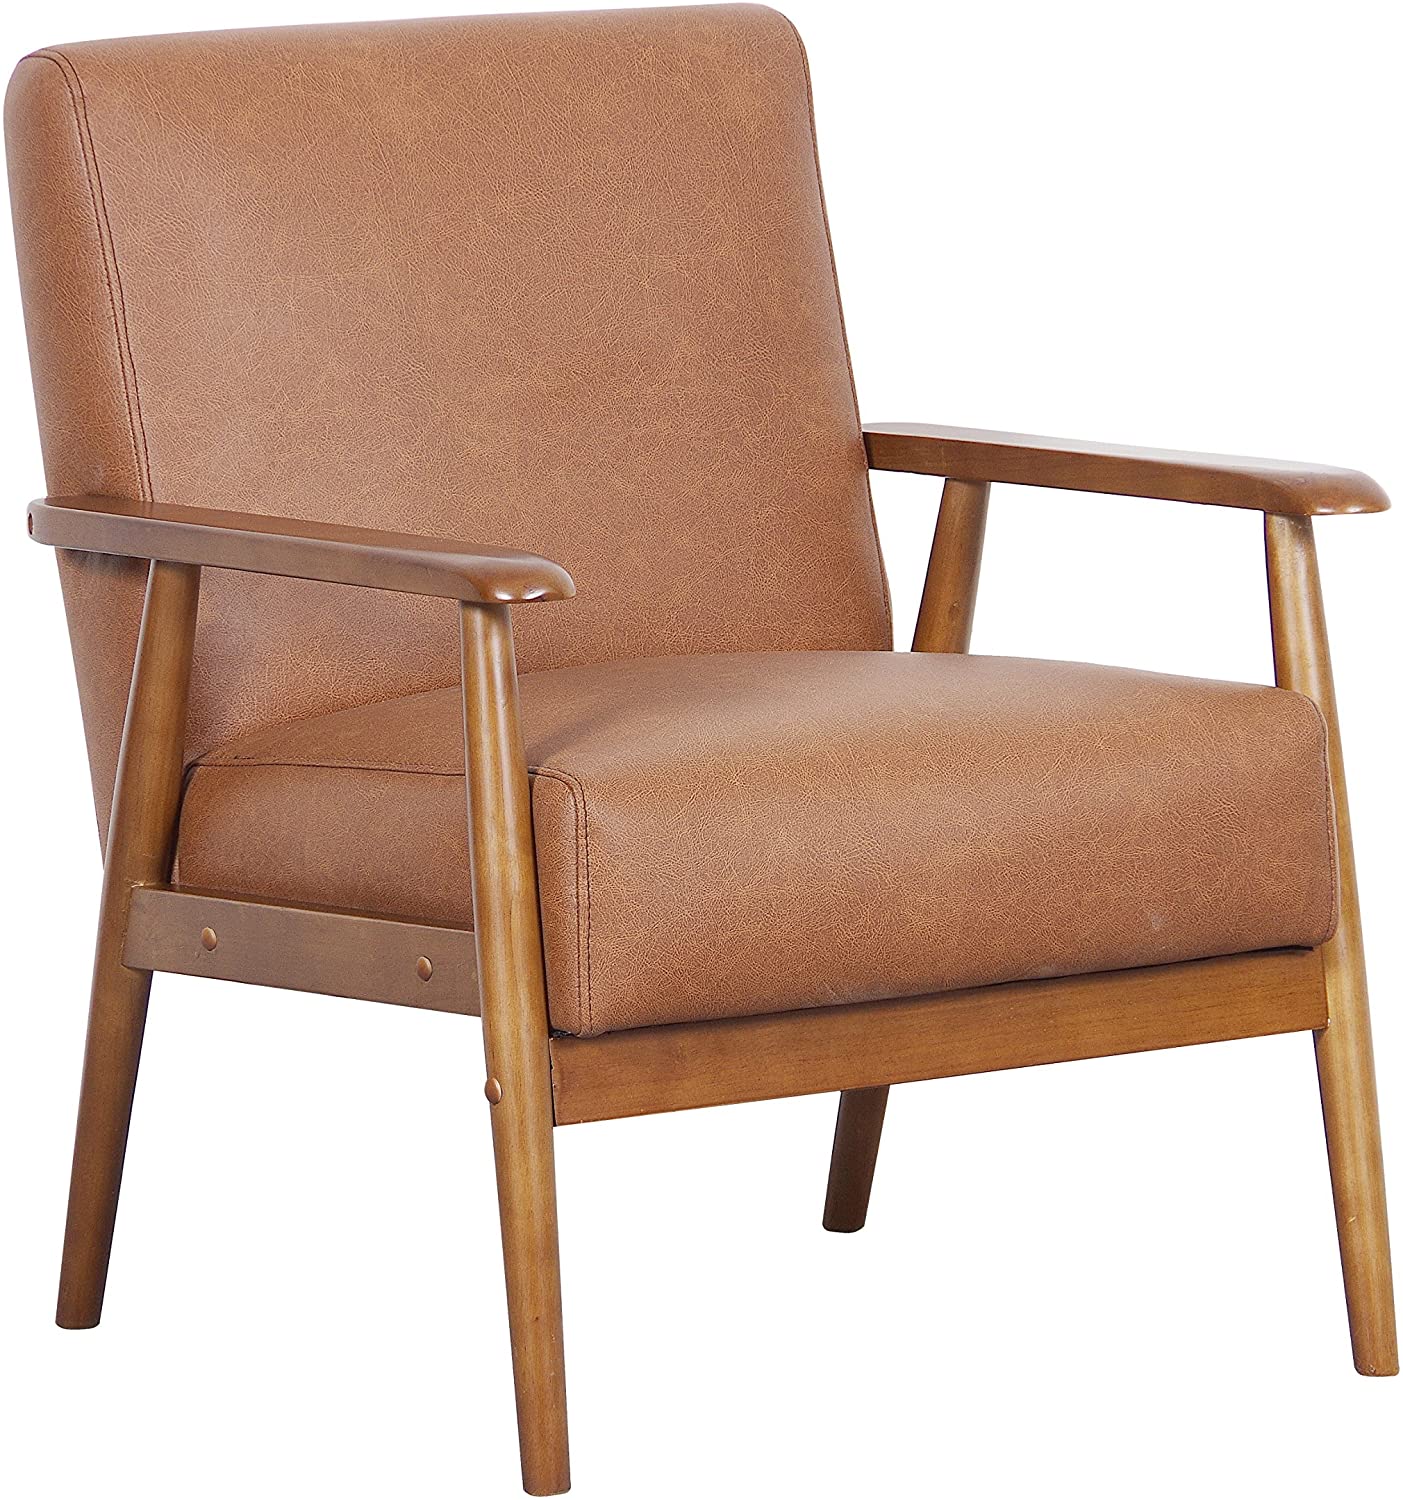 brown leather modern arm chair with wooden arm rests and legs